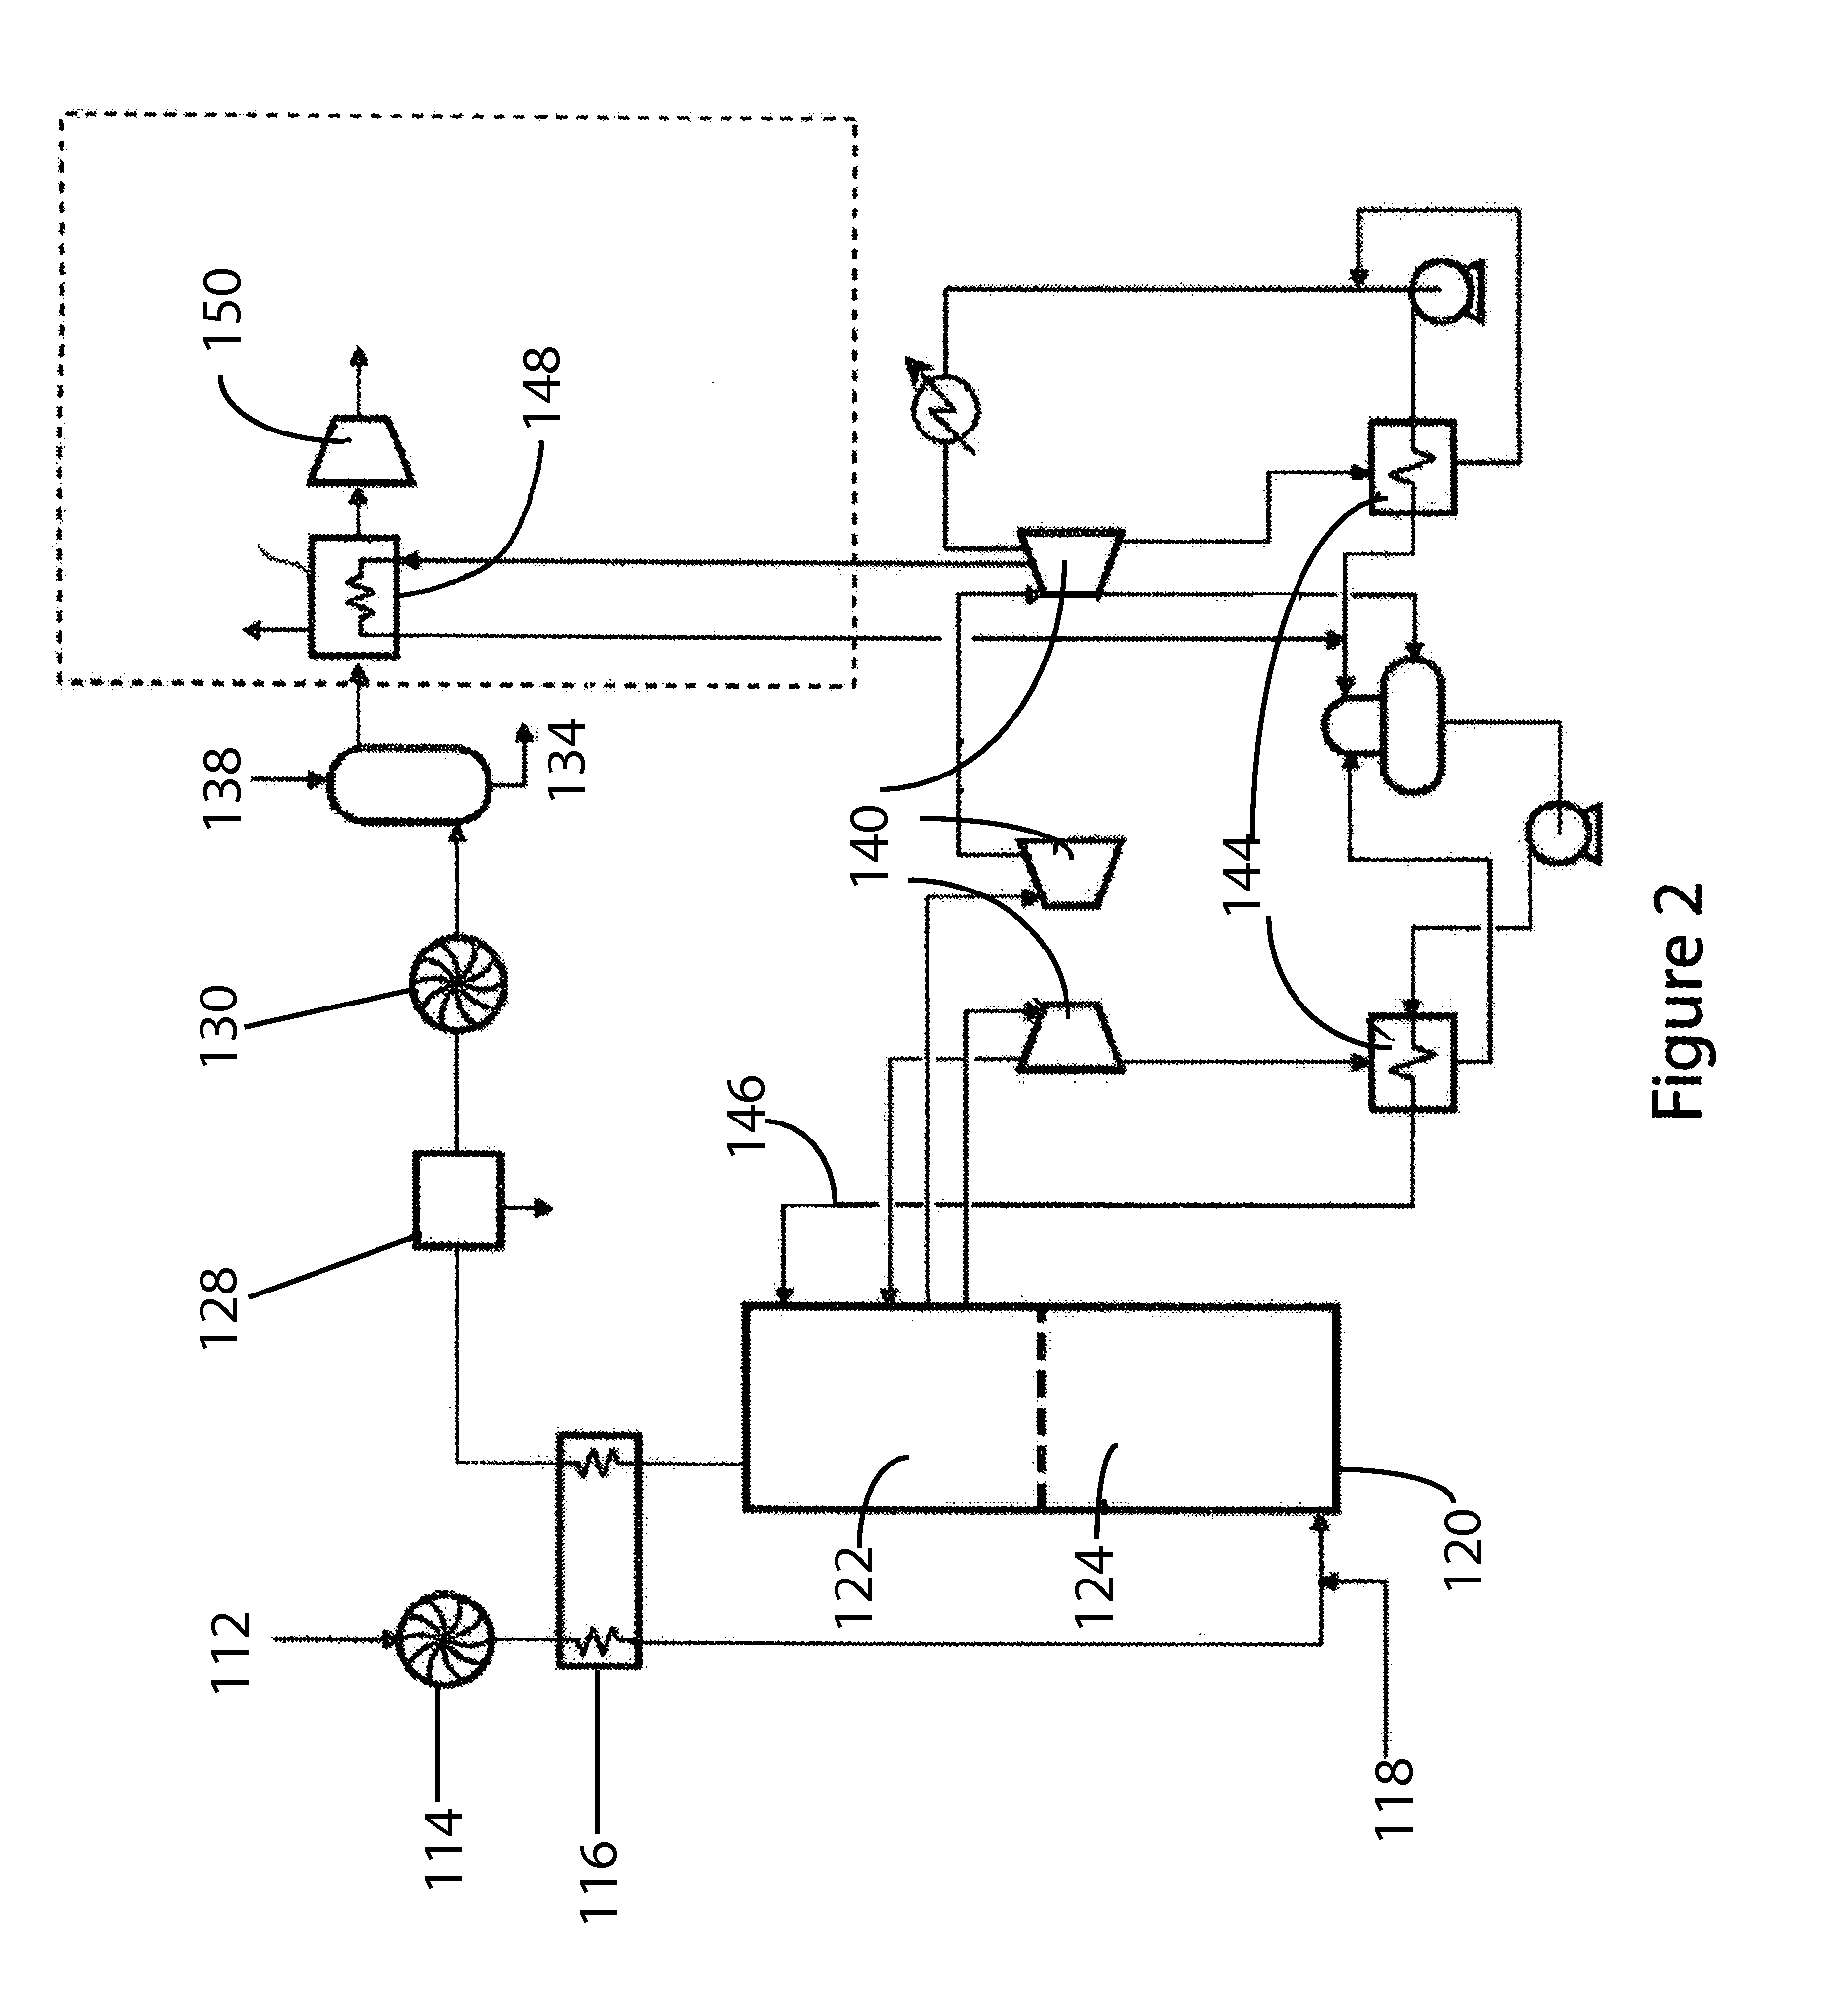 Method for UV photolytic separation of pollutant gases from an emission stream